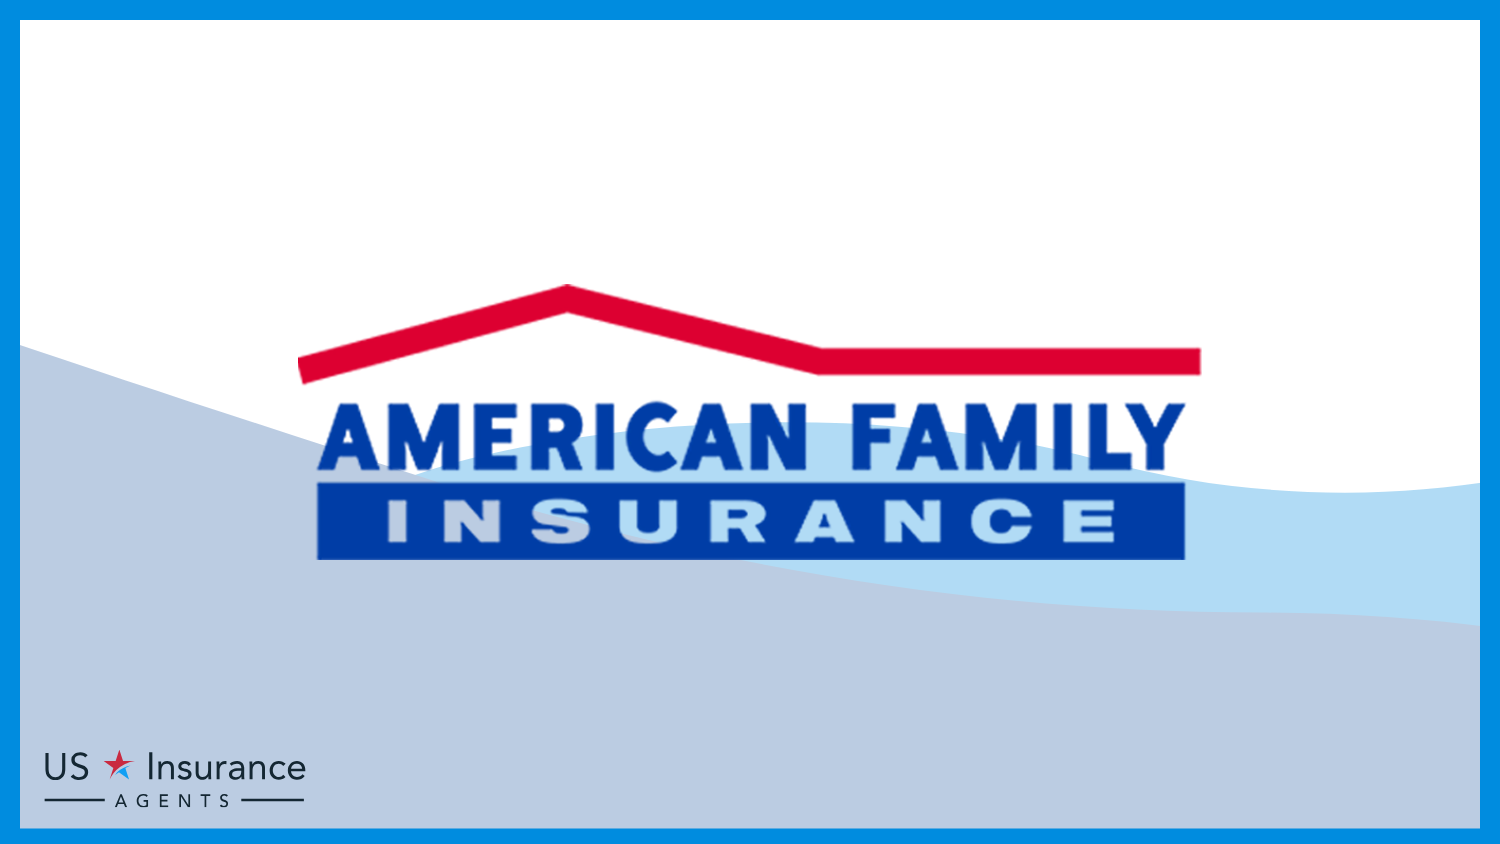 American Family: Best Car Insurance for Healthcare Professionals